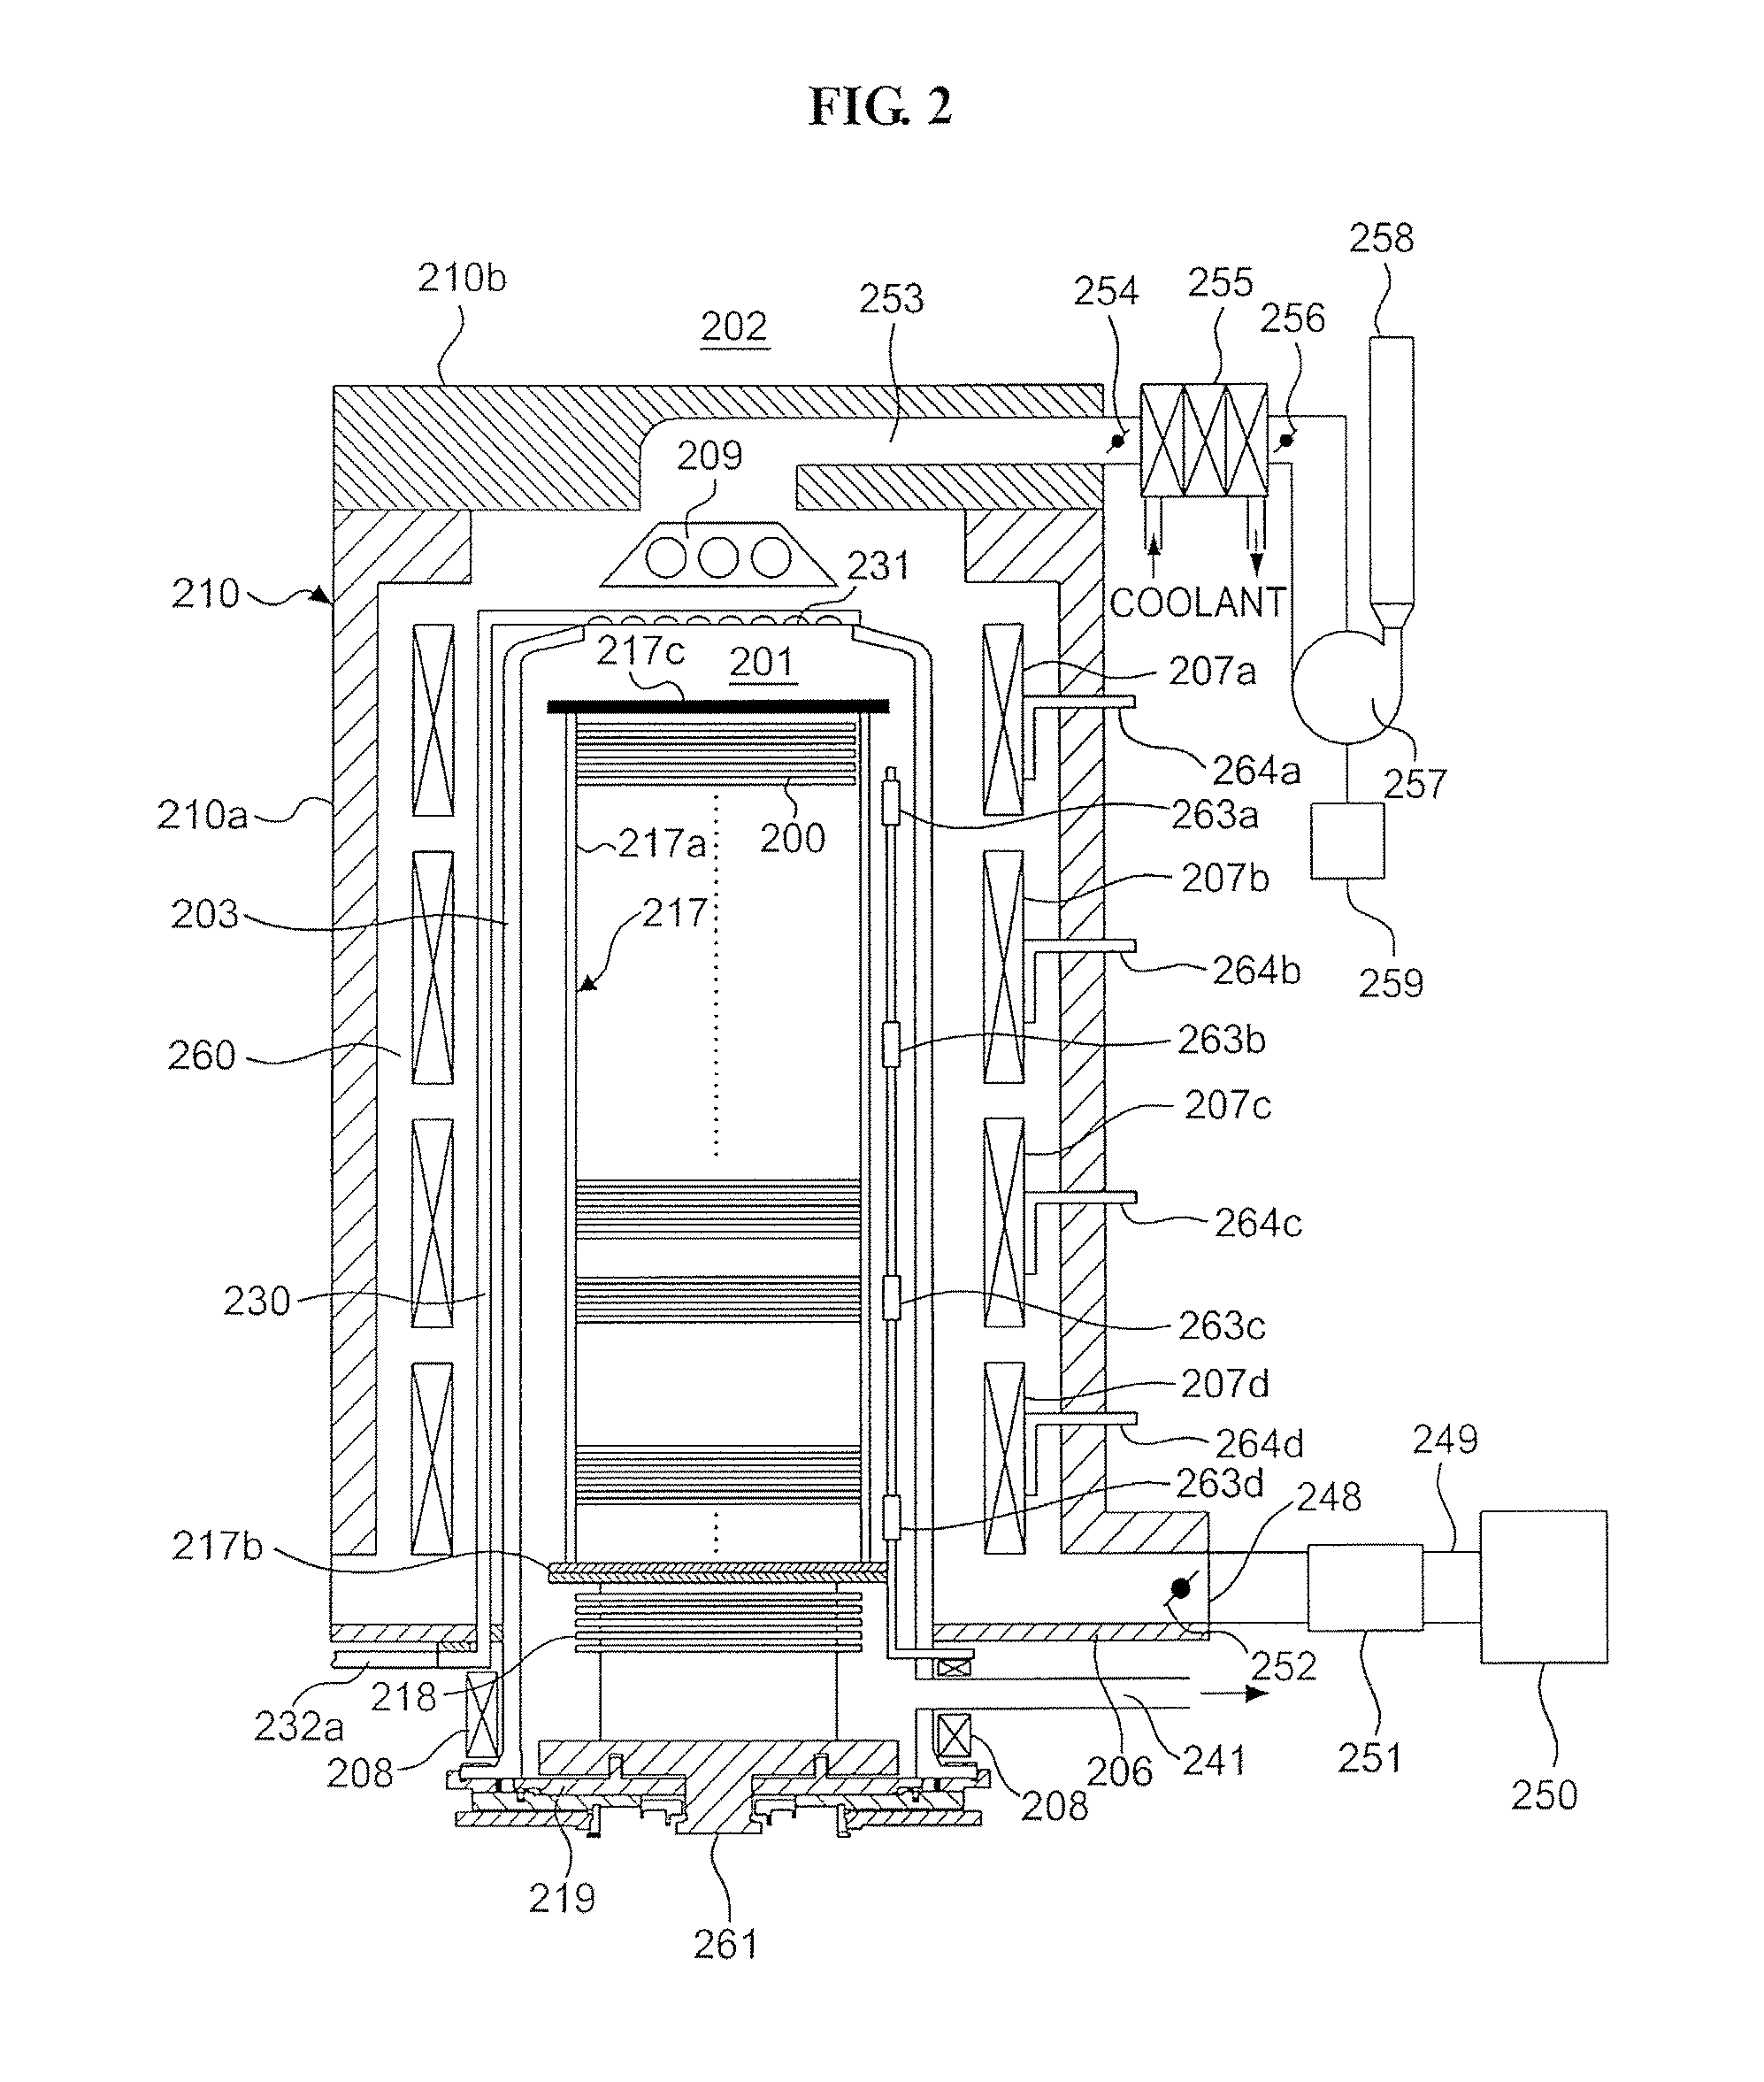 Substrate processing apparatus, method of manufacturing semiconductor device and furnace lid